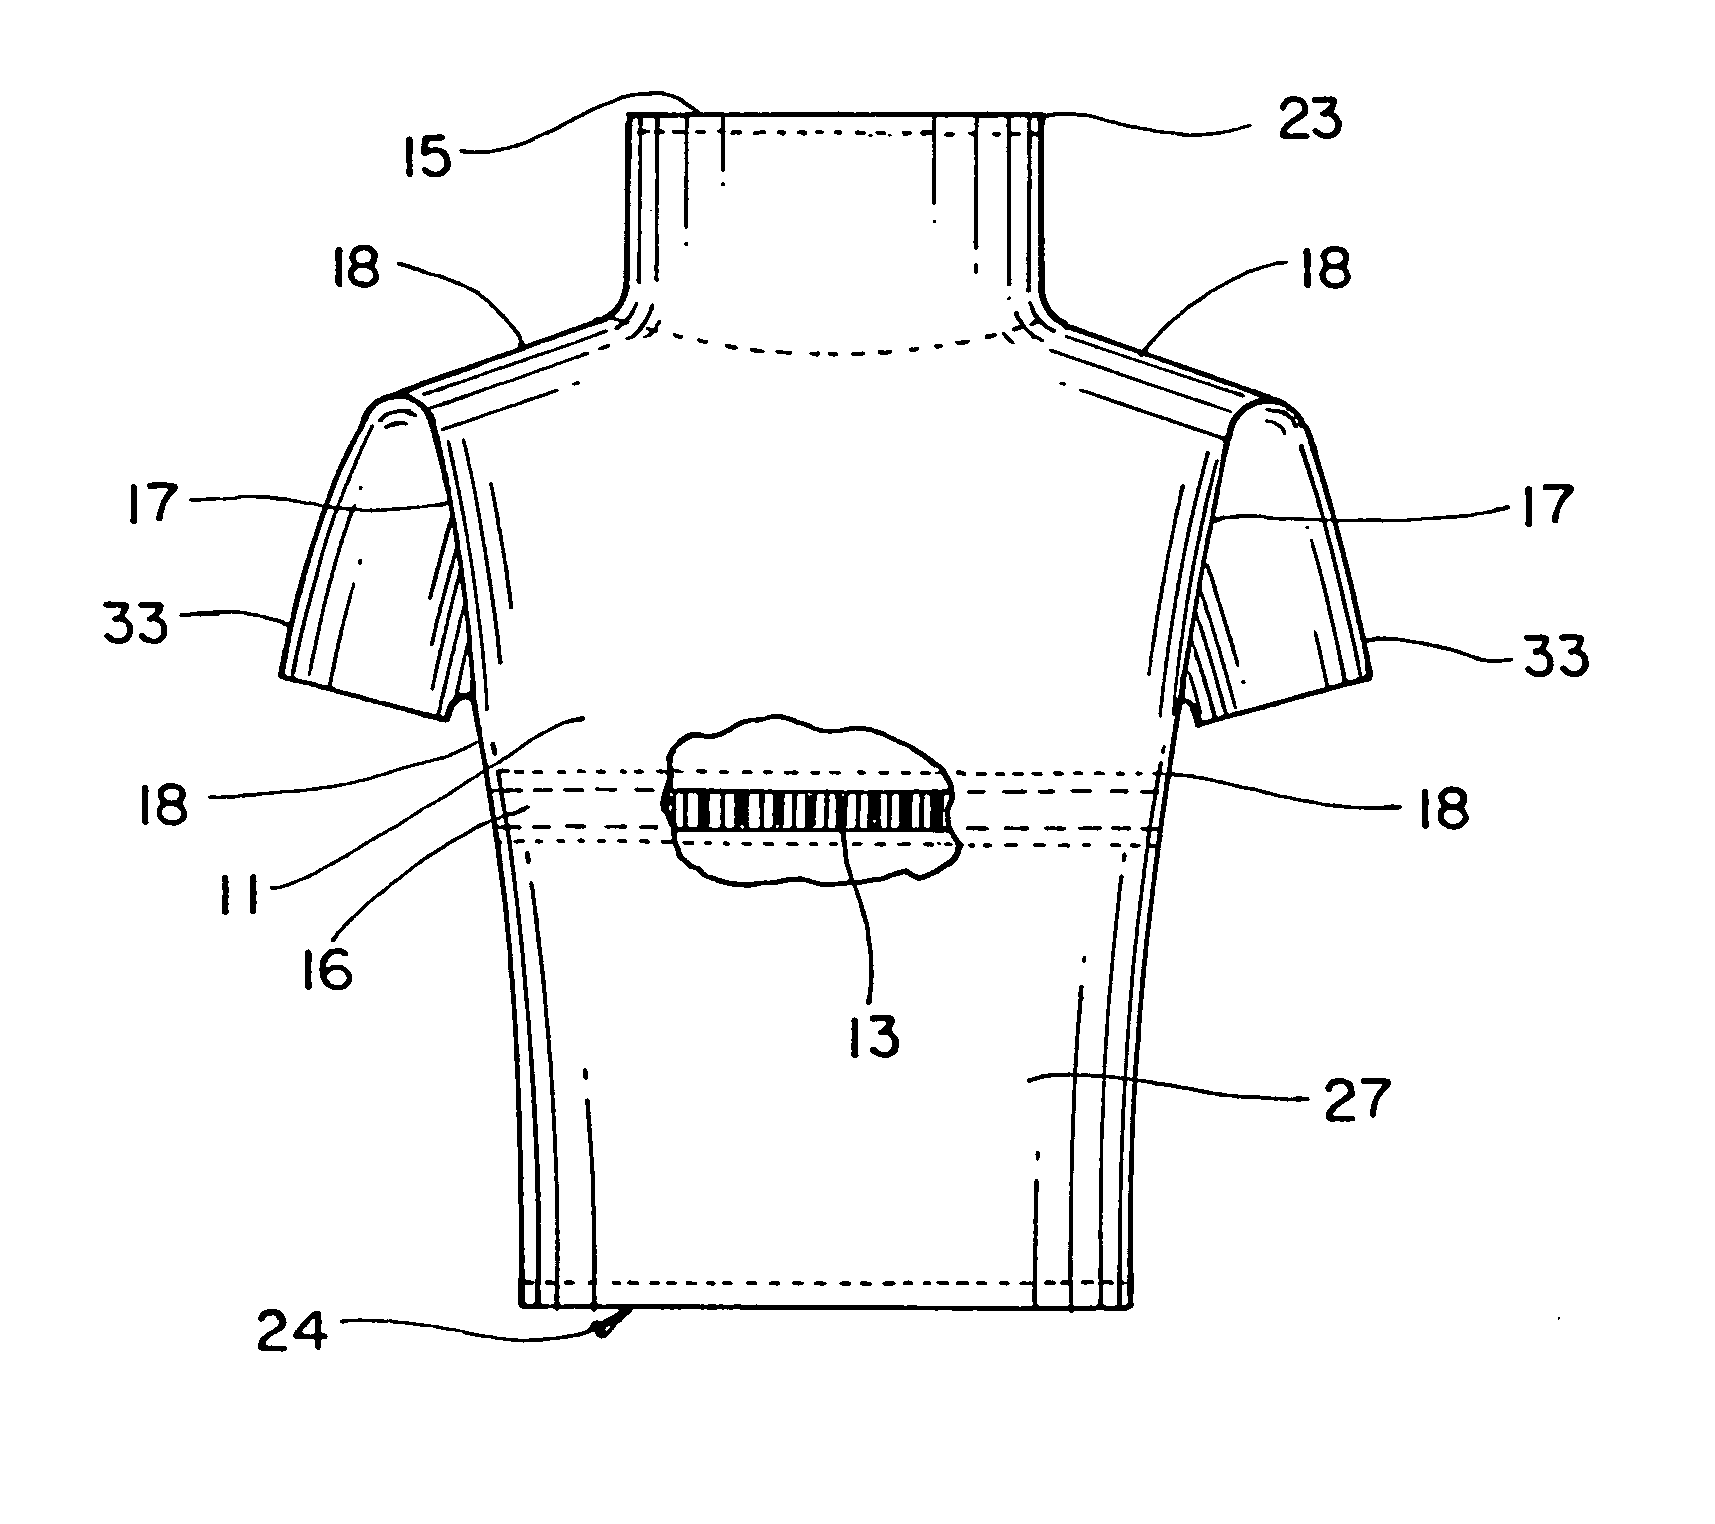 Thermally-insulative, breast-supportive undergarment